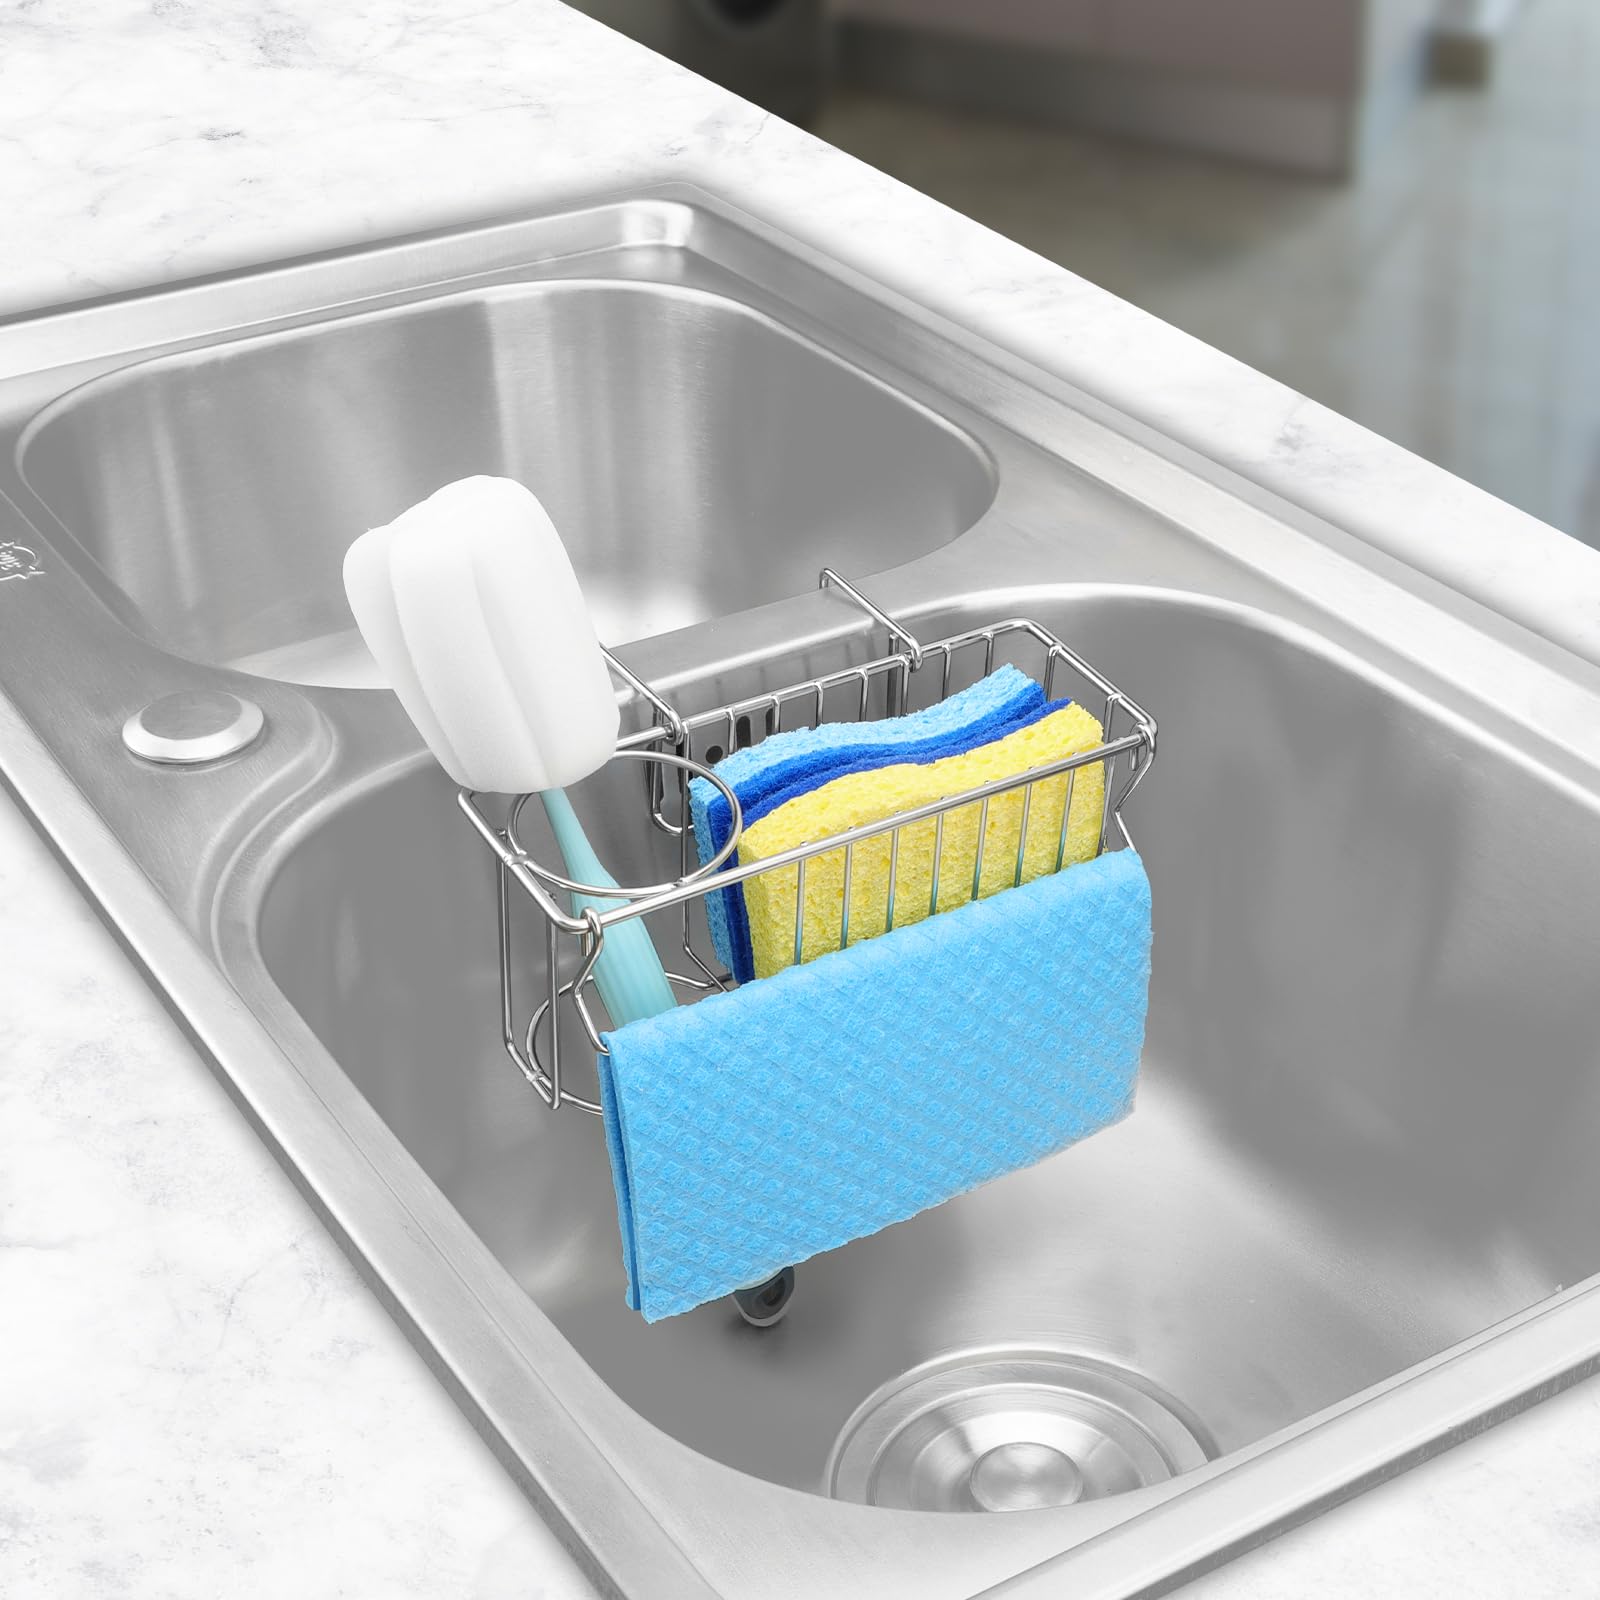 Aiduy Sponge Holder for Kitchen Sink - 3 In 1 Sink Caddy for Brush Holder Dish Cloth Hanger Stainless Steel Organizer Rack for Drain Stopper Scrubber Soap Tray